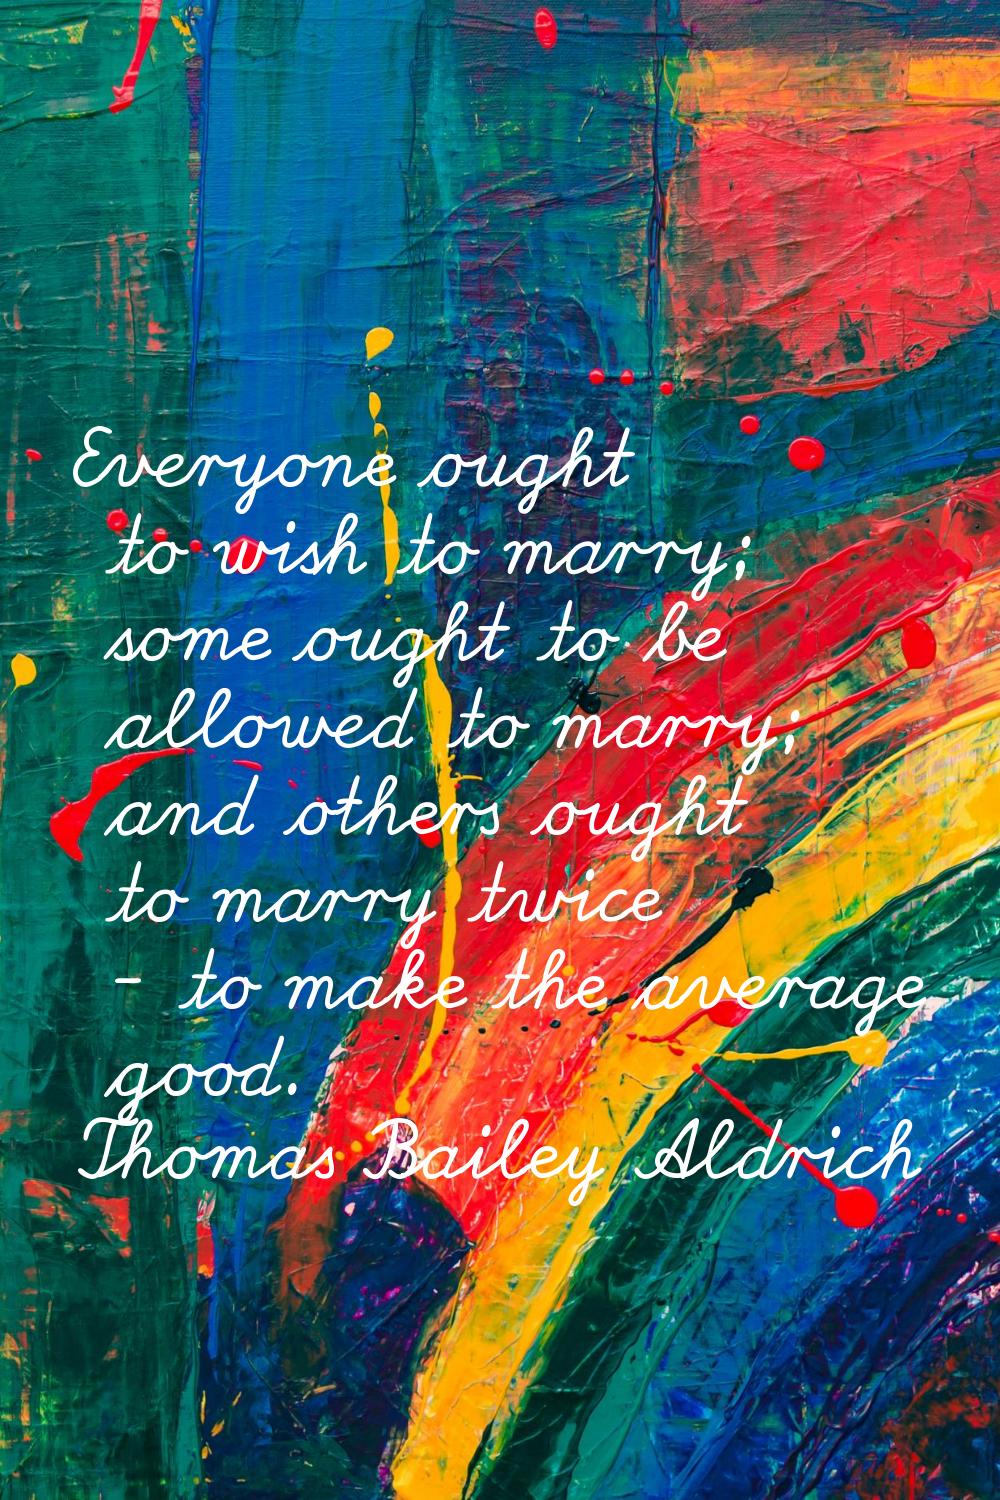 Everyone ought to wish to marry; some ought to be allowed to marry; and others ought to marry twice